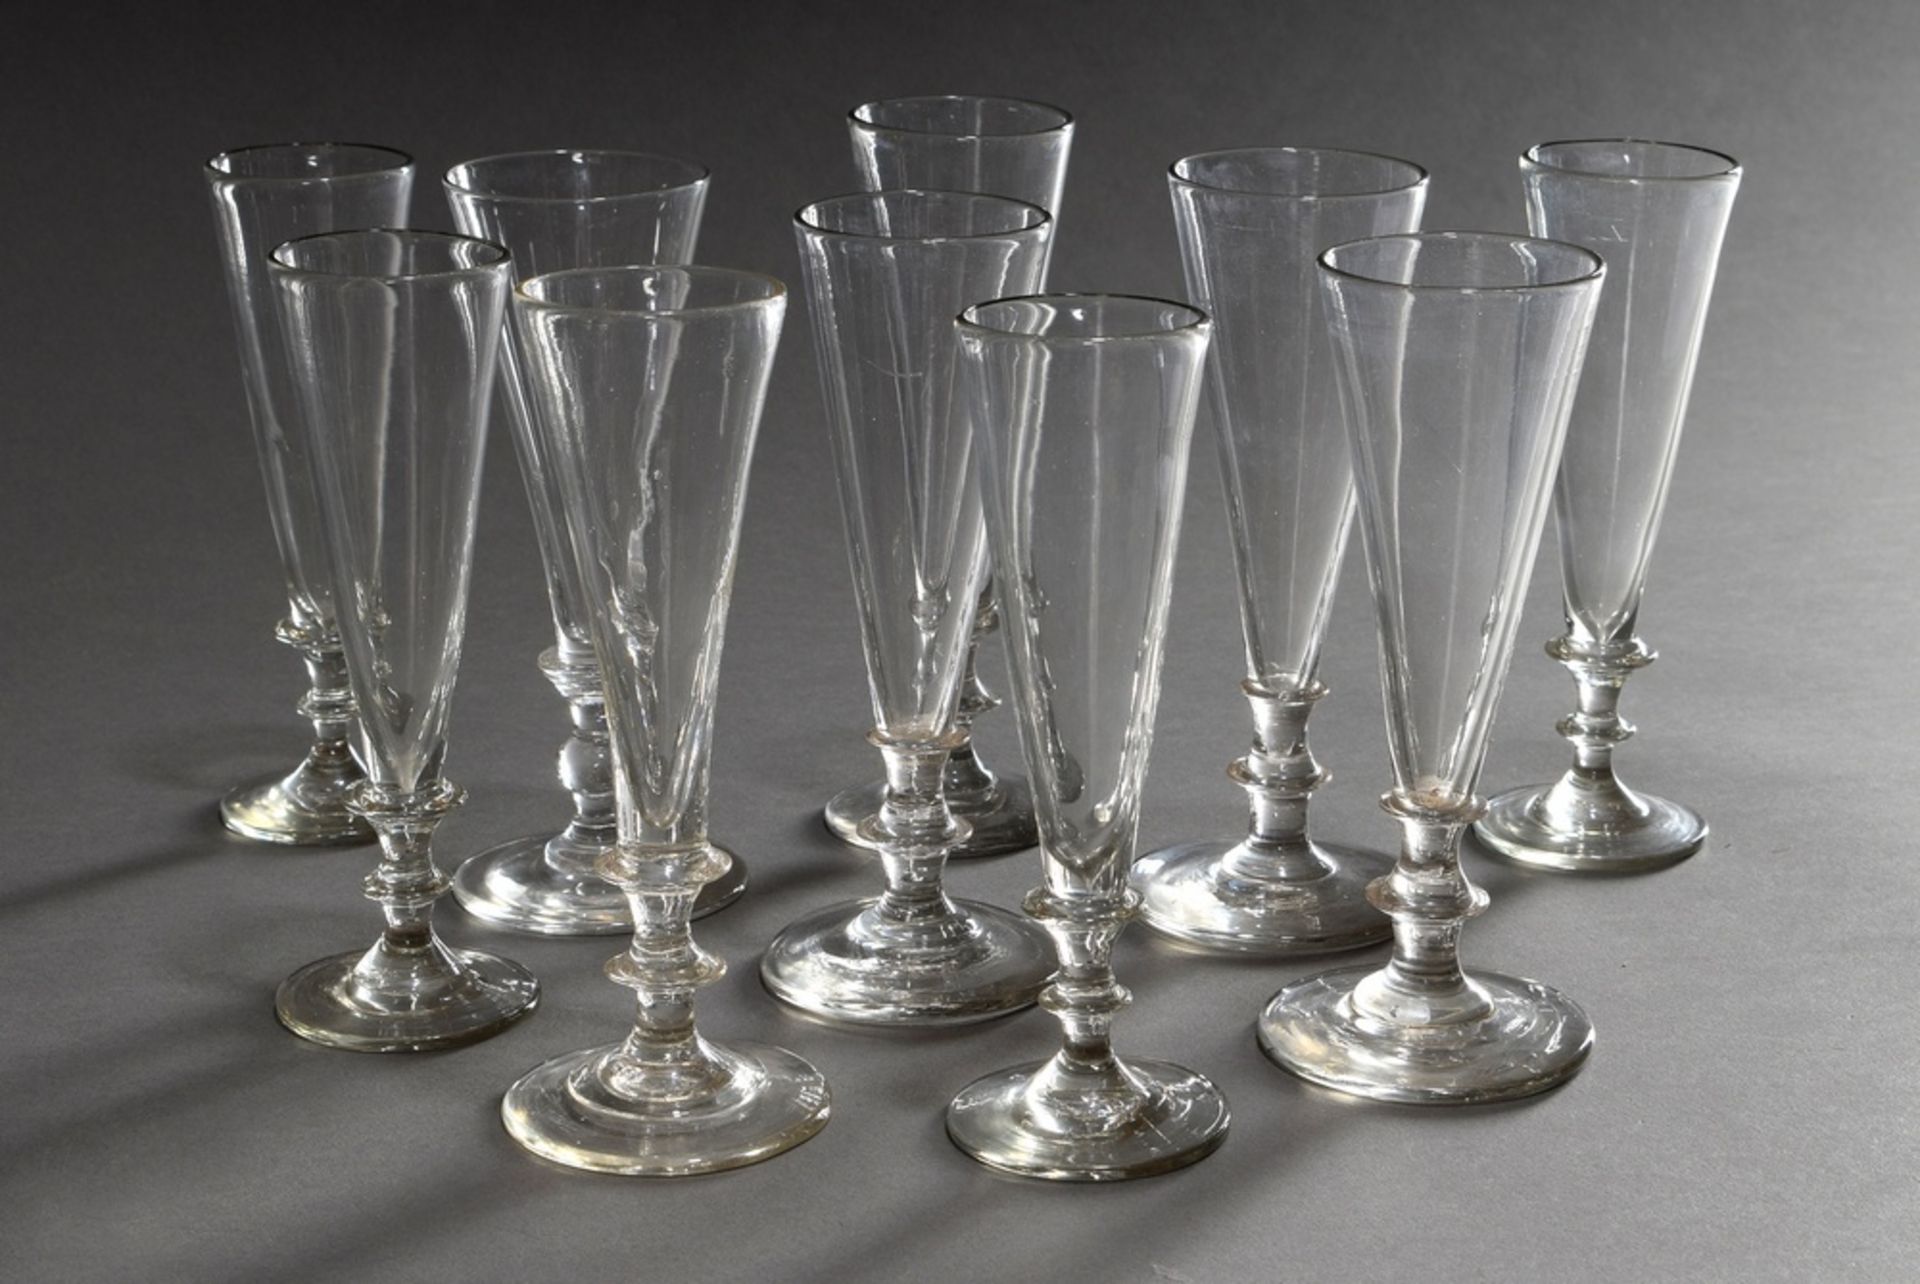 10 Plain champagne flutes with conical dome and pressed nodus in stem, 19th century, h. 17-18cm, 1x